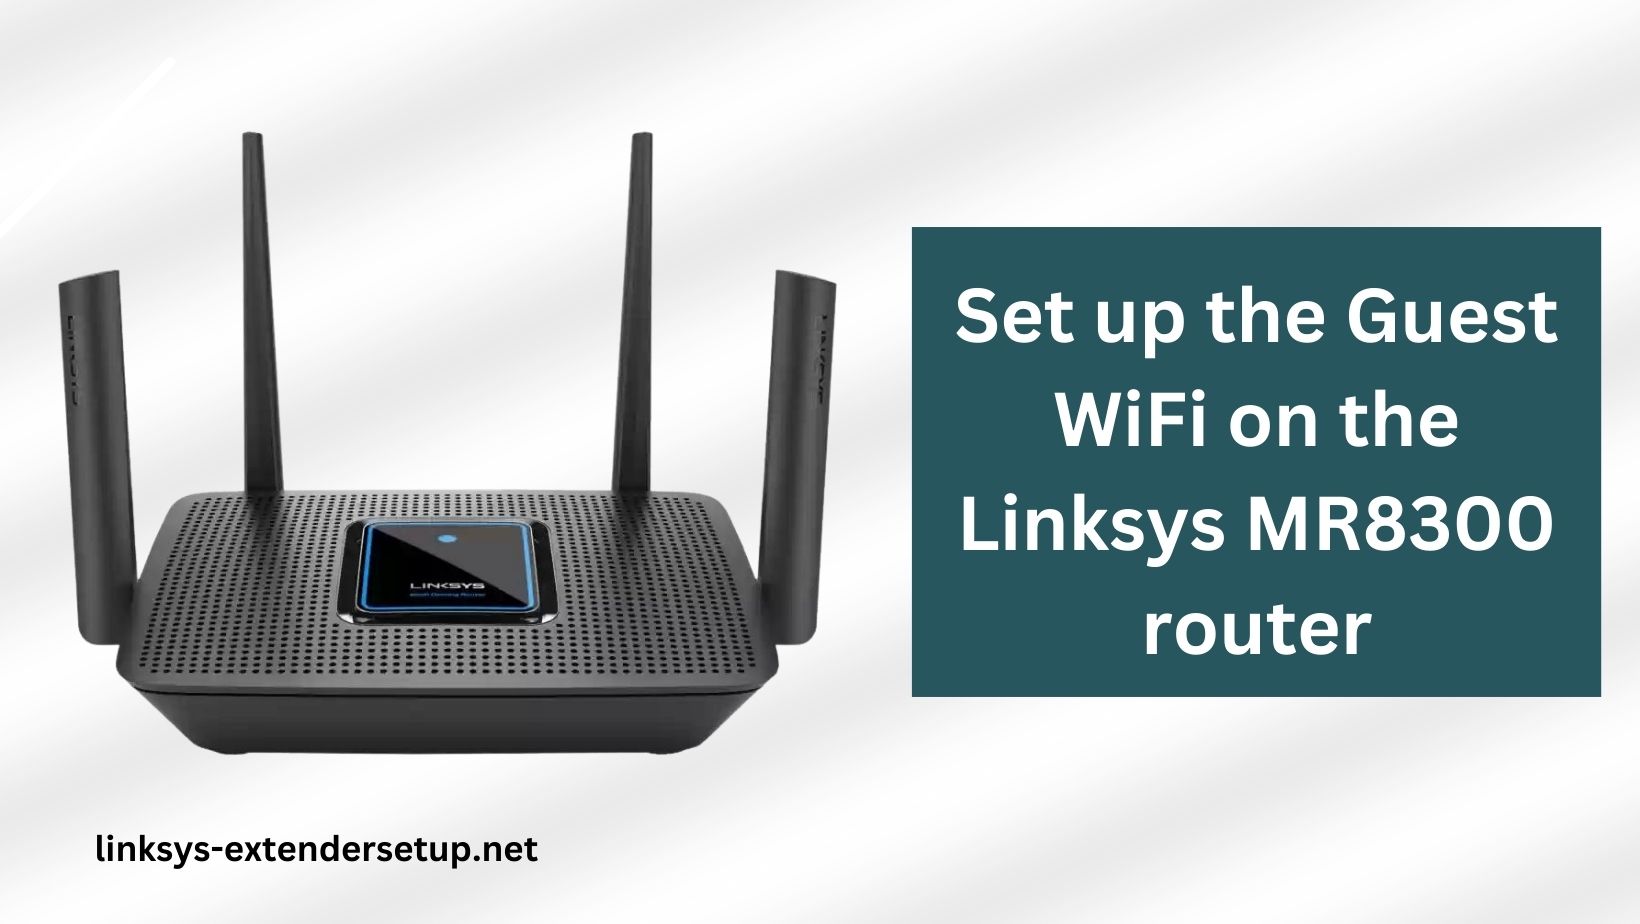 You are currently viewing A Guide to set up the Guest WiFi on the Linksys MR8300 router